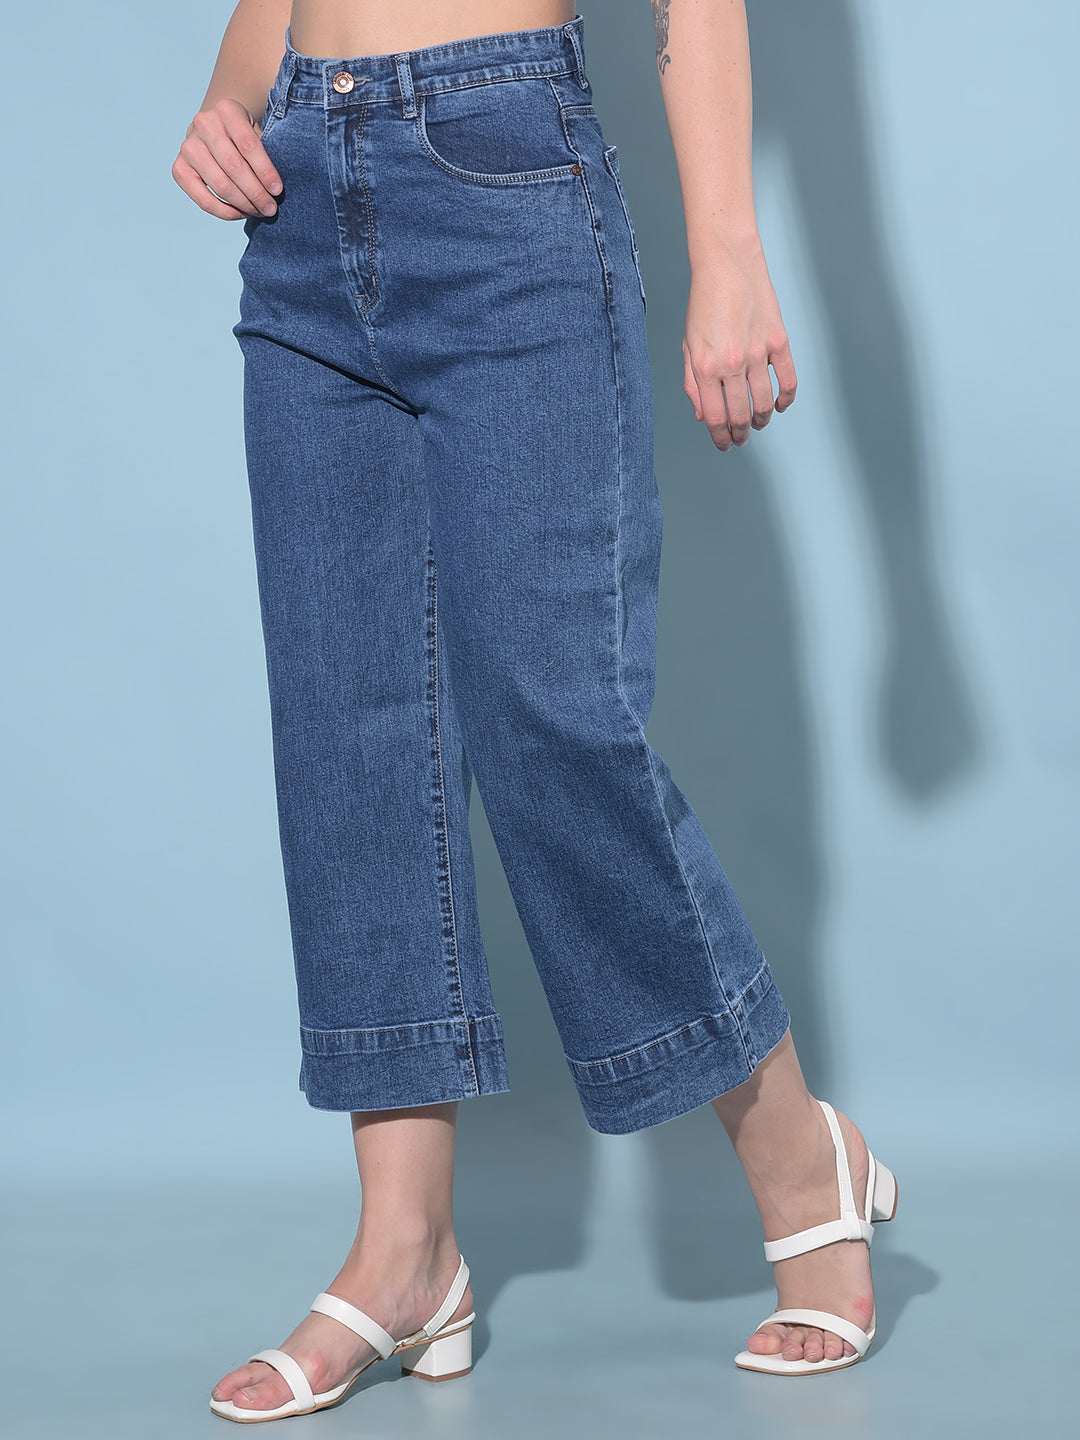 Distressed Cropped Jeans-Women Jeans-Crimsoune Club